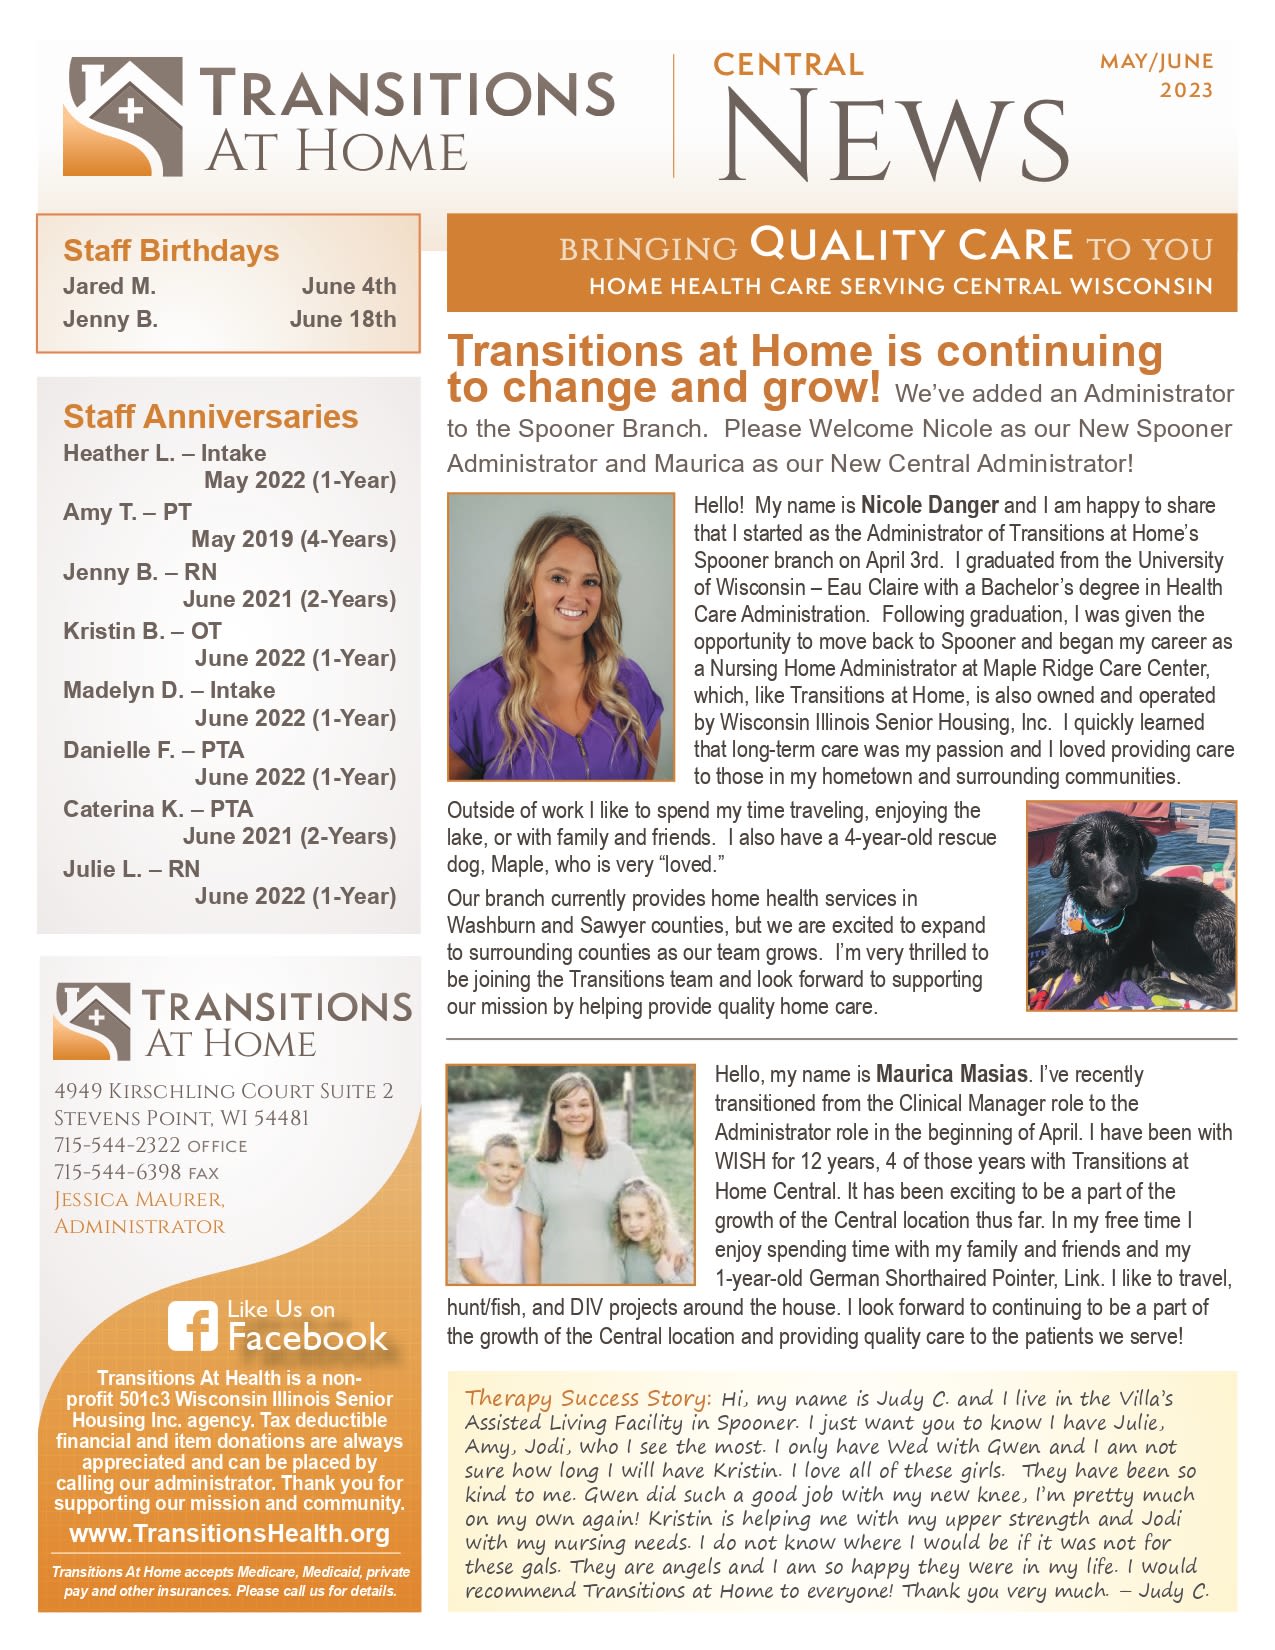 May 2023 Newsletter  at Transitions At Home - Central in Stevens Point, Wisconsin